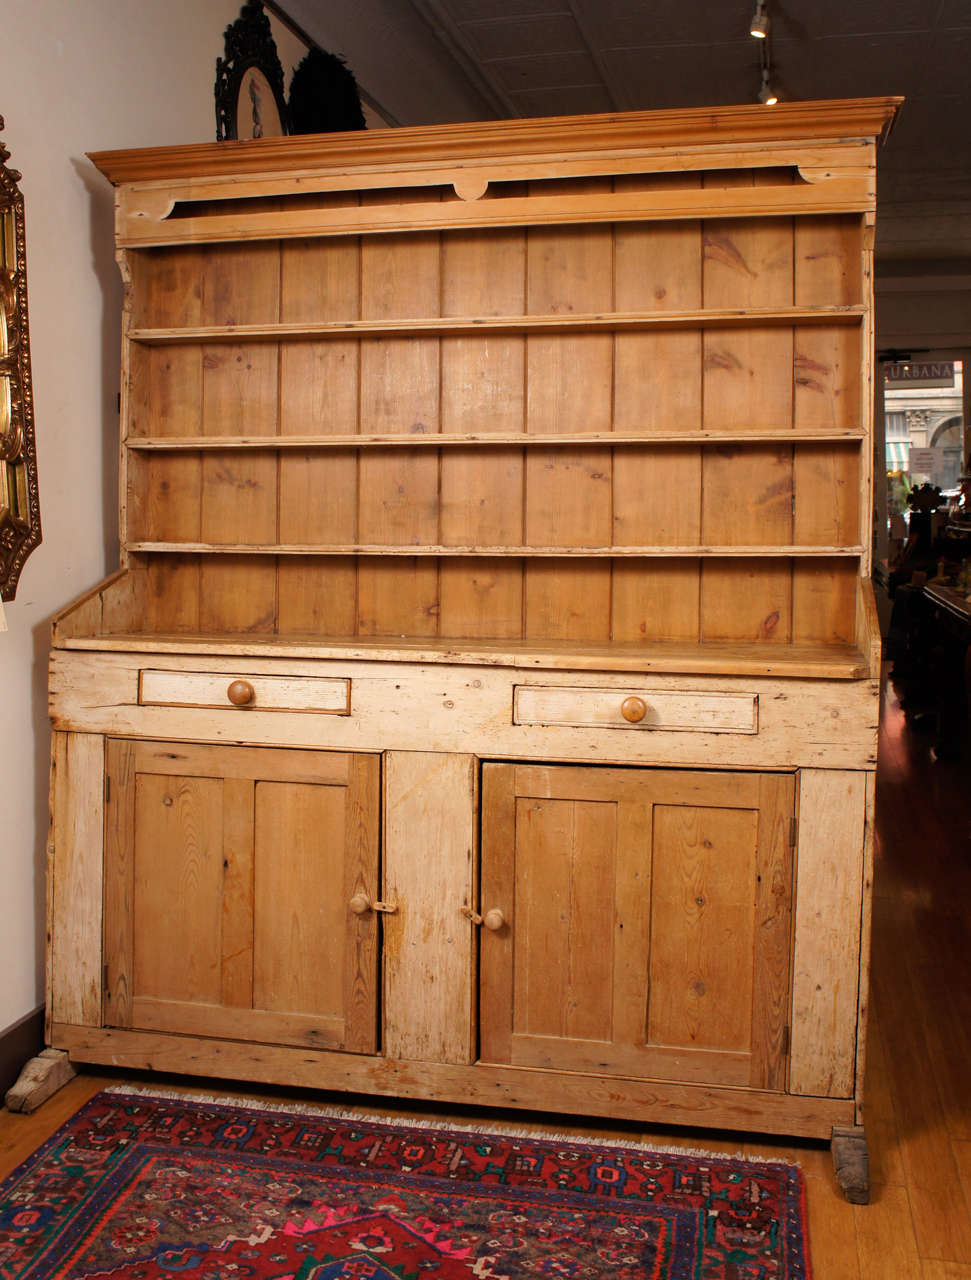 This nice old piece was probably made as two separate objects used in tandem but in the early part of this century were reconfigured to become one single piece . The construction is pine throughout and shows country carpentry consistent with its use